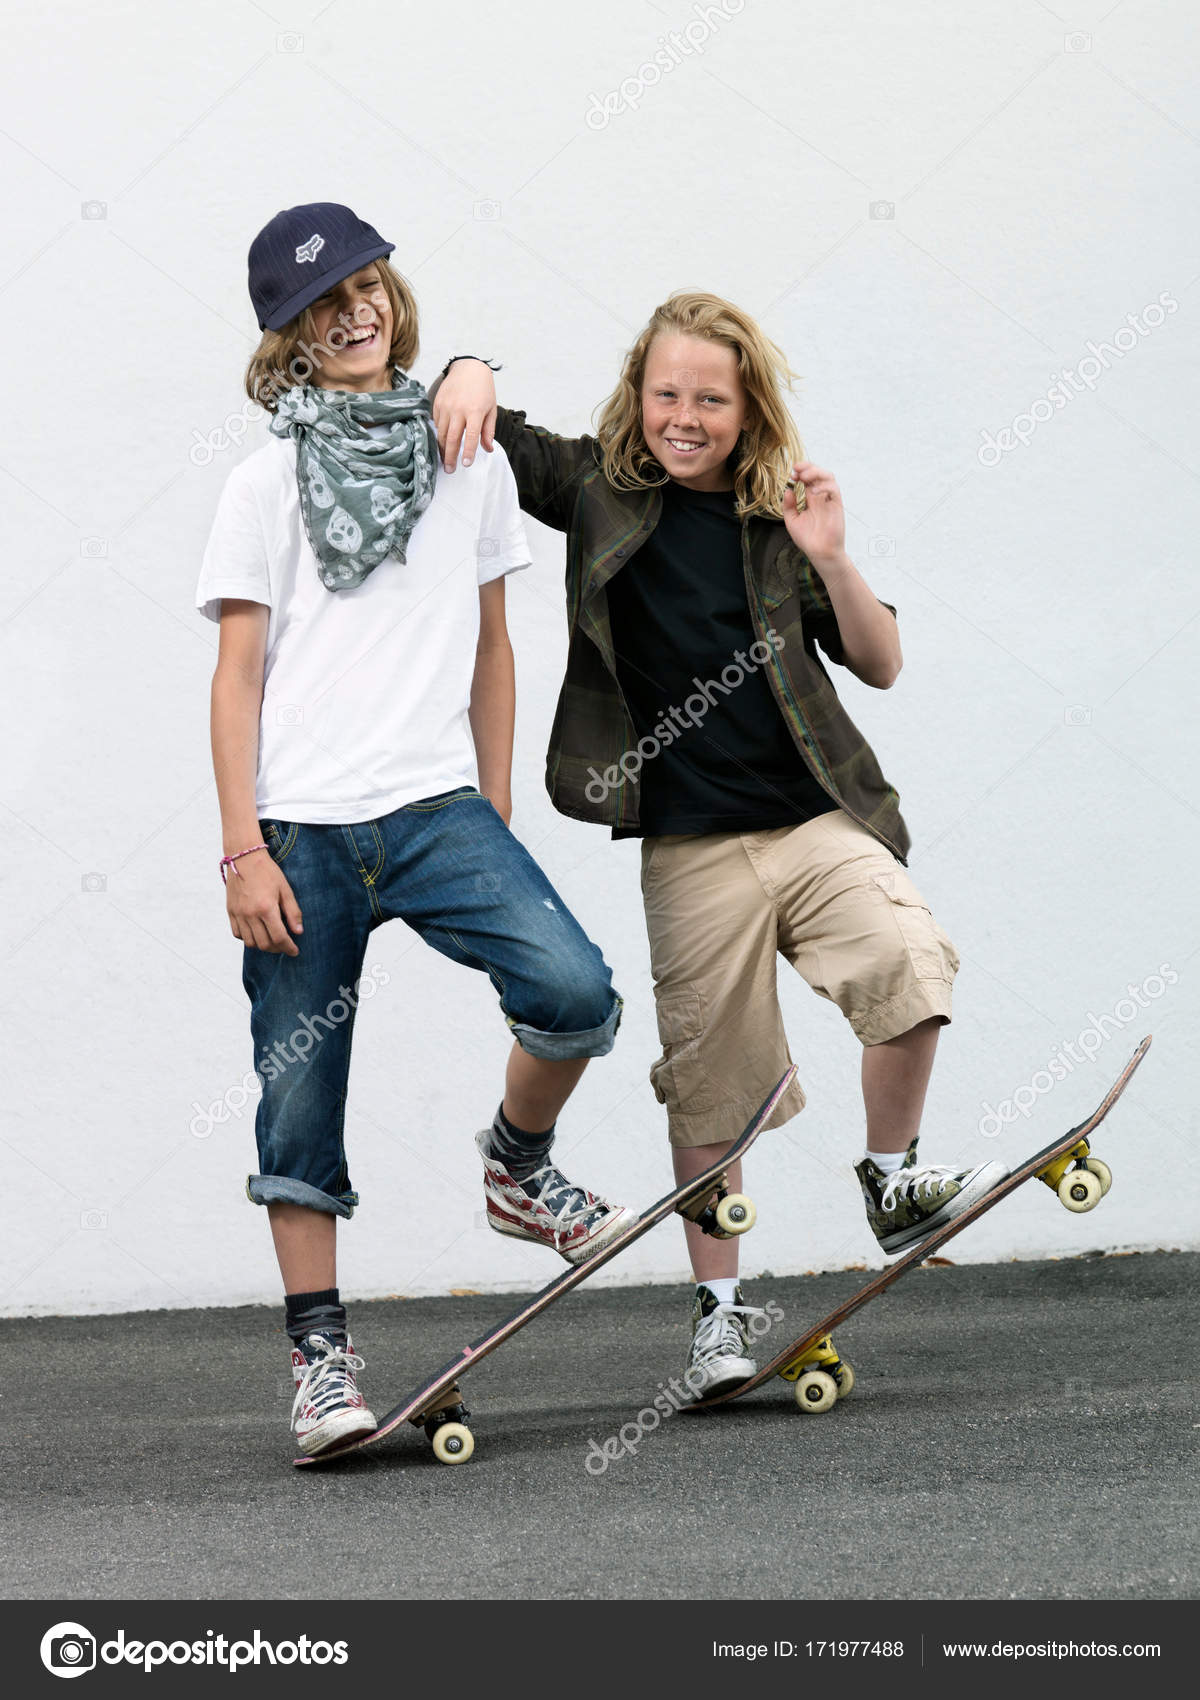 Two Boys Skateboards — Stock Photo © ImageSource #171977488